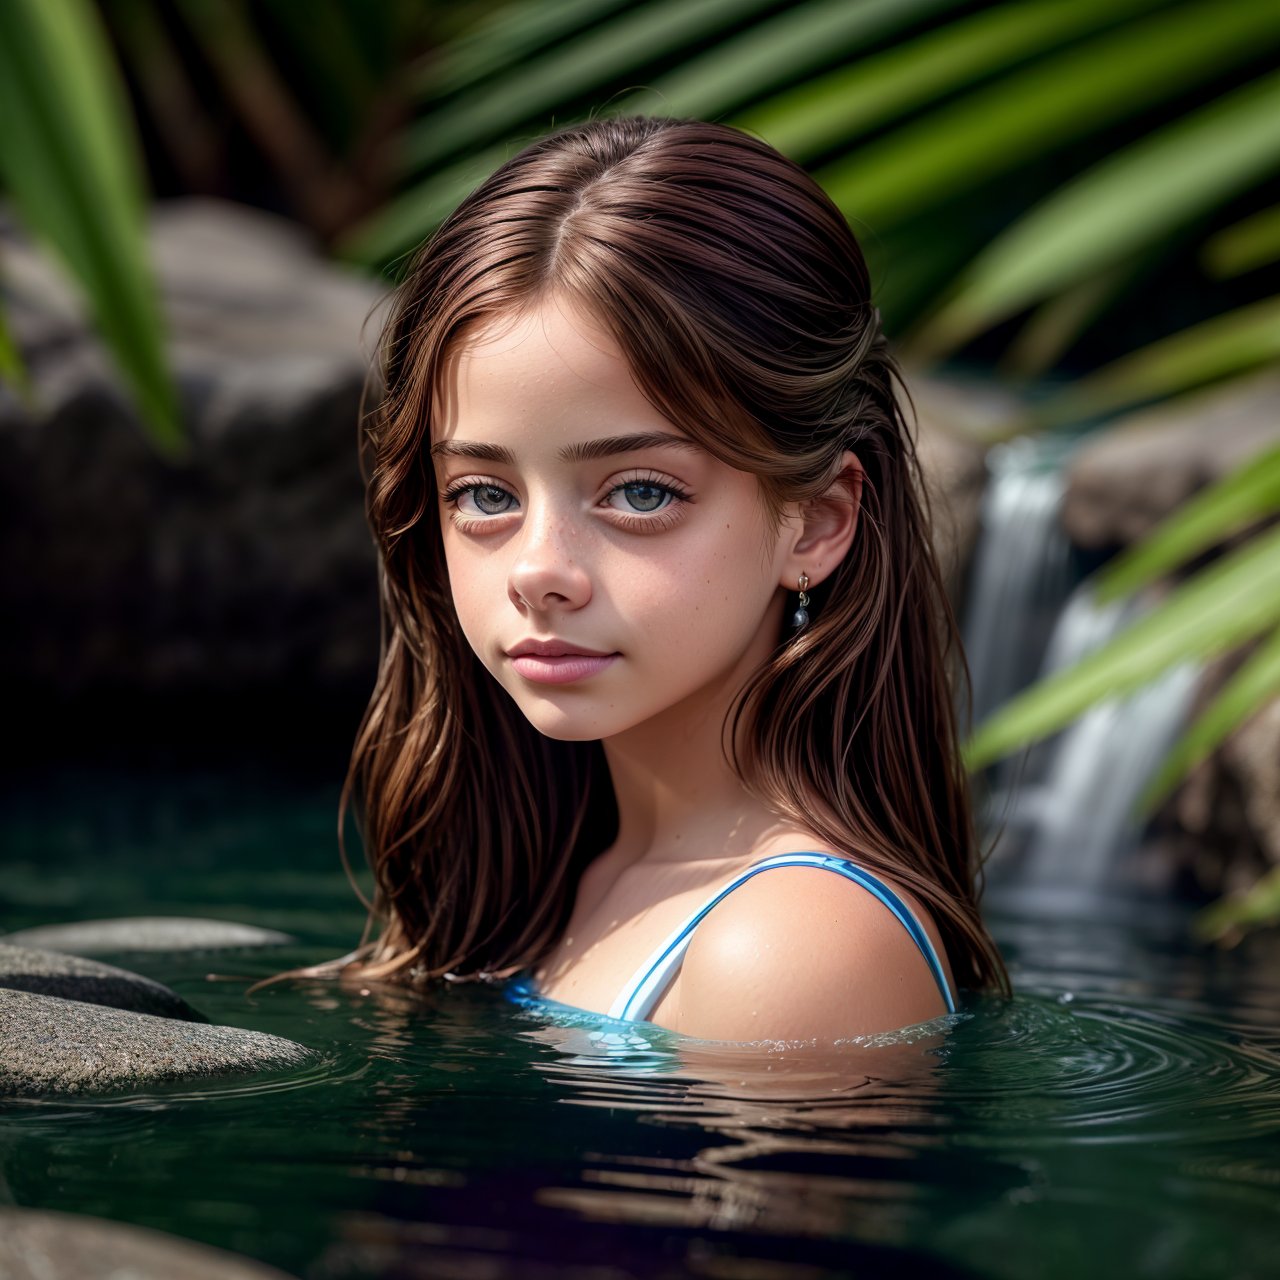 (masterpiece:1.3), view from below, full body portrait of self-assurance (AIDA_LoRA_RiWo:1.1) <lora:AIDA_LoRA_RiWo:0.84> in a blue swimsuit sitting on the stones in a waterfall, water, wet, sunlight, outdoors, little girl, pretty face, intimate, dramatic, insane level of details, studio photo, studio photo, kkw-ph1, hdr, f1.6, (colorful:1.1)